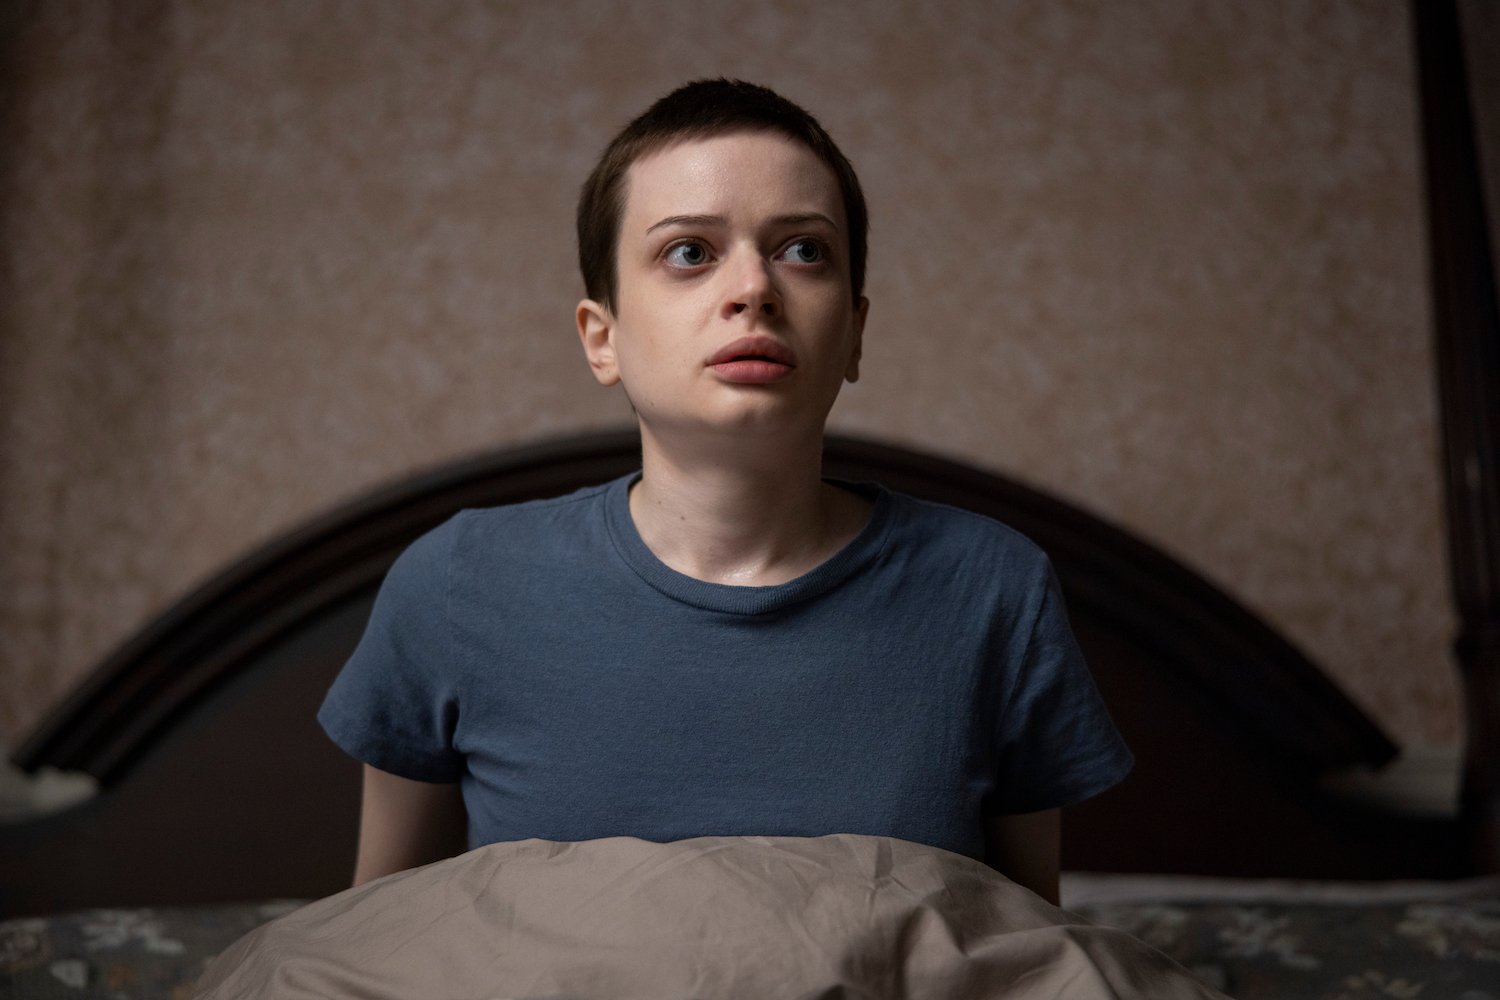 In 'The Midnight Club,' Anya's story touches on the guil she feels over her parents' death. Anya's seen here wearing a blue tshirt and sitting bed.